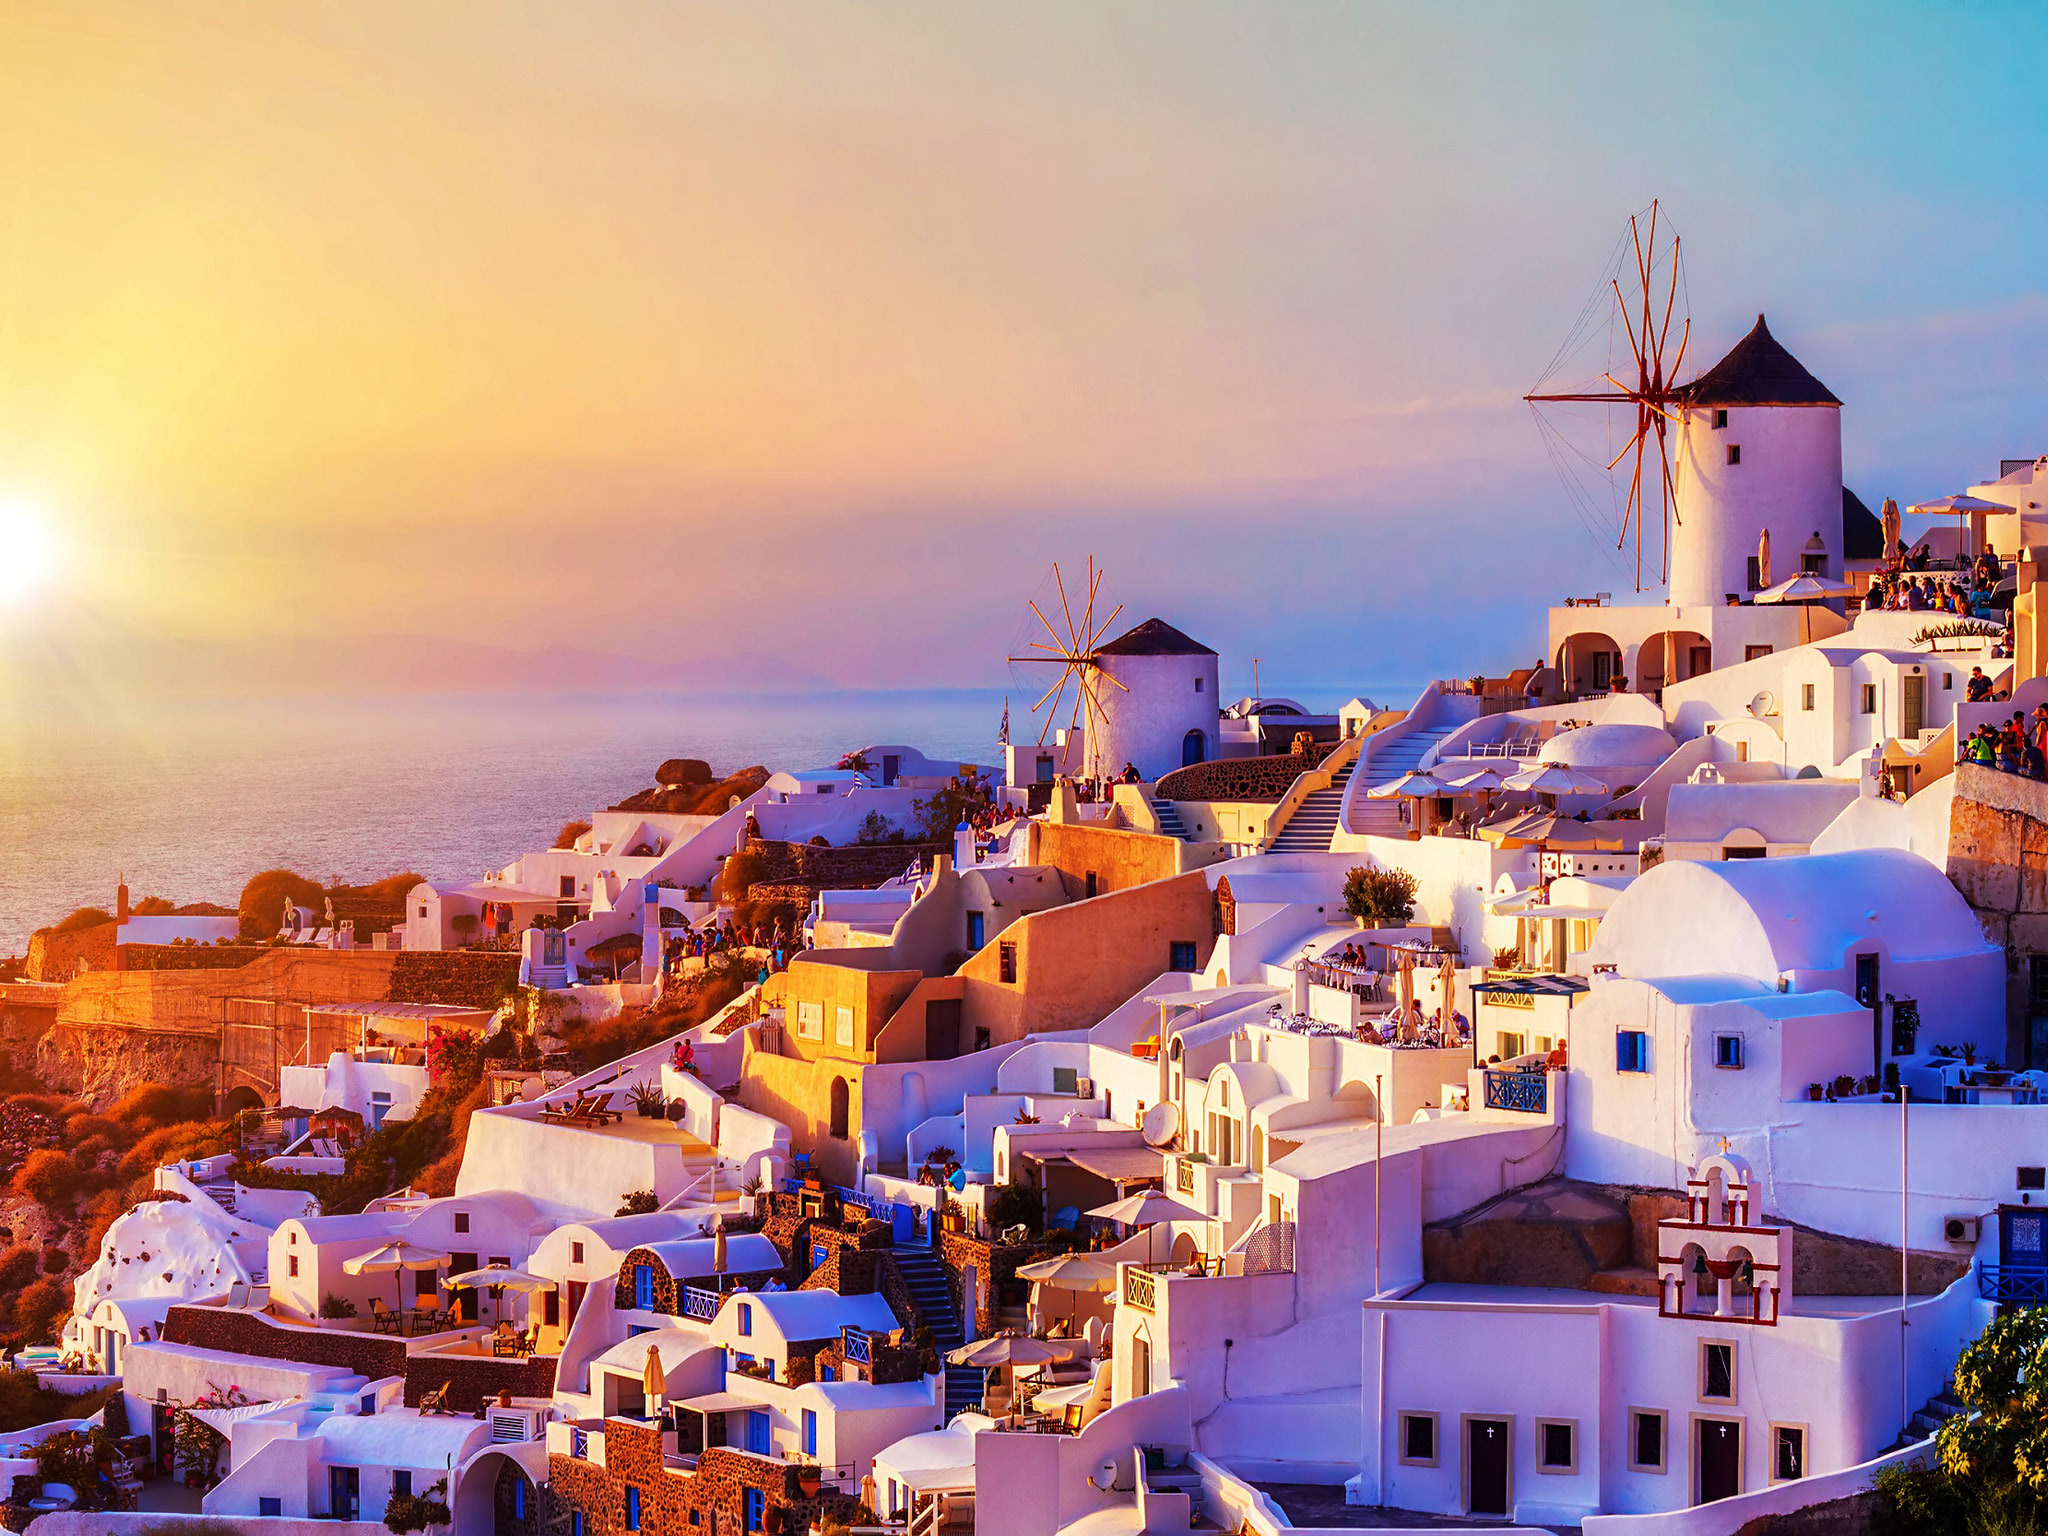 The spectacular sunset over the Oia village in Santorini, Greece